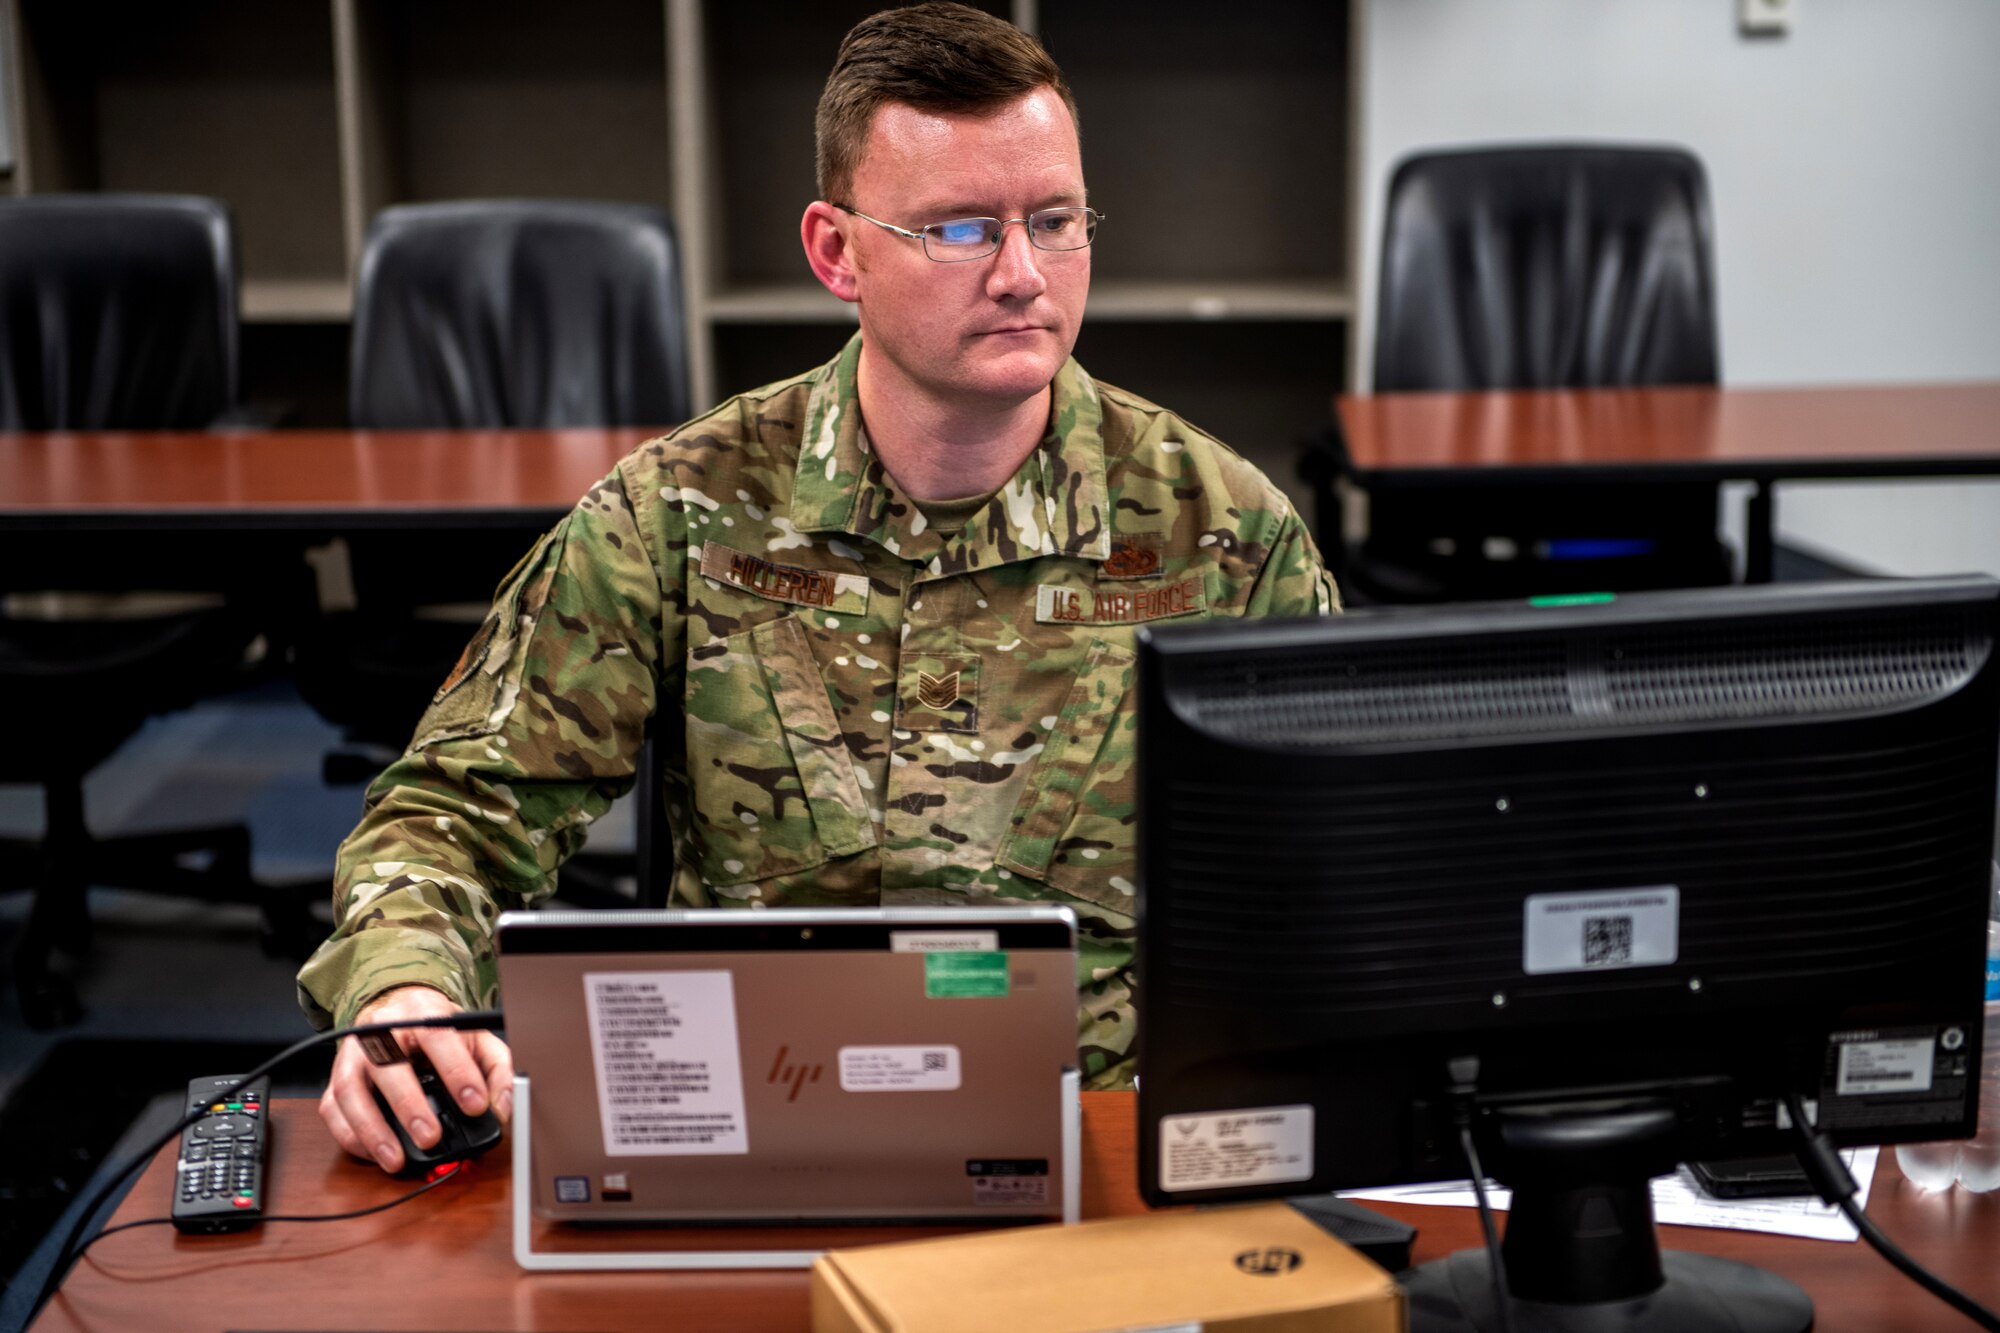 U.S. Air Force Tech. Sgt. Pete Hilleren, Robert D. Gaylor Non-Commissioned Officer Academy (NCOA) student instructor, engages with his students during a virtual class June 23, 2020, at Joint Base San Antonio-Lackland, Texas. (